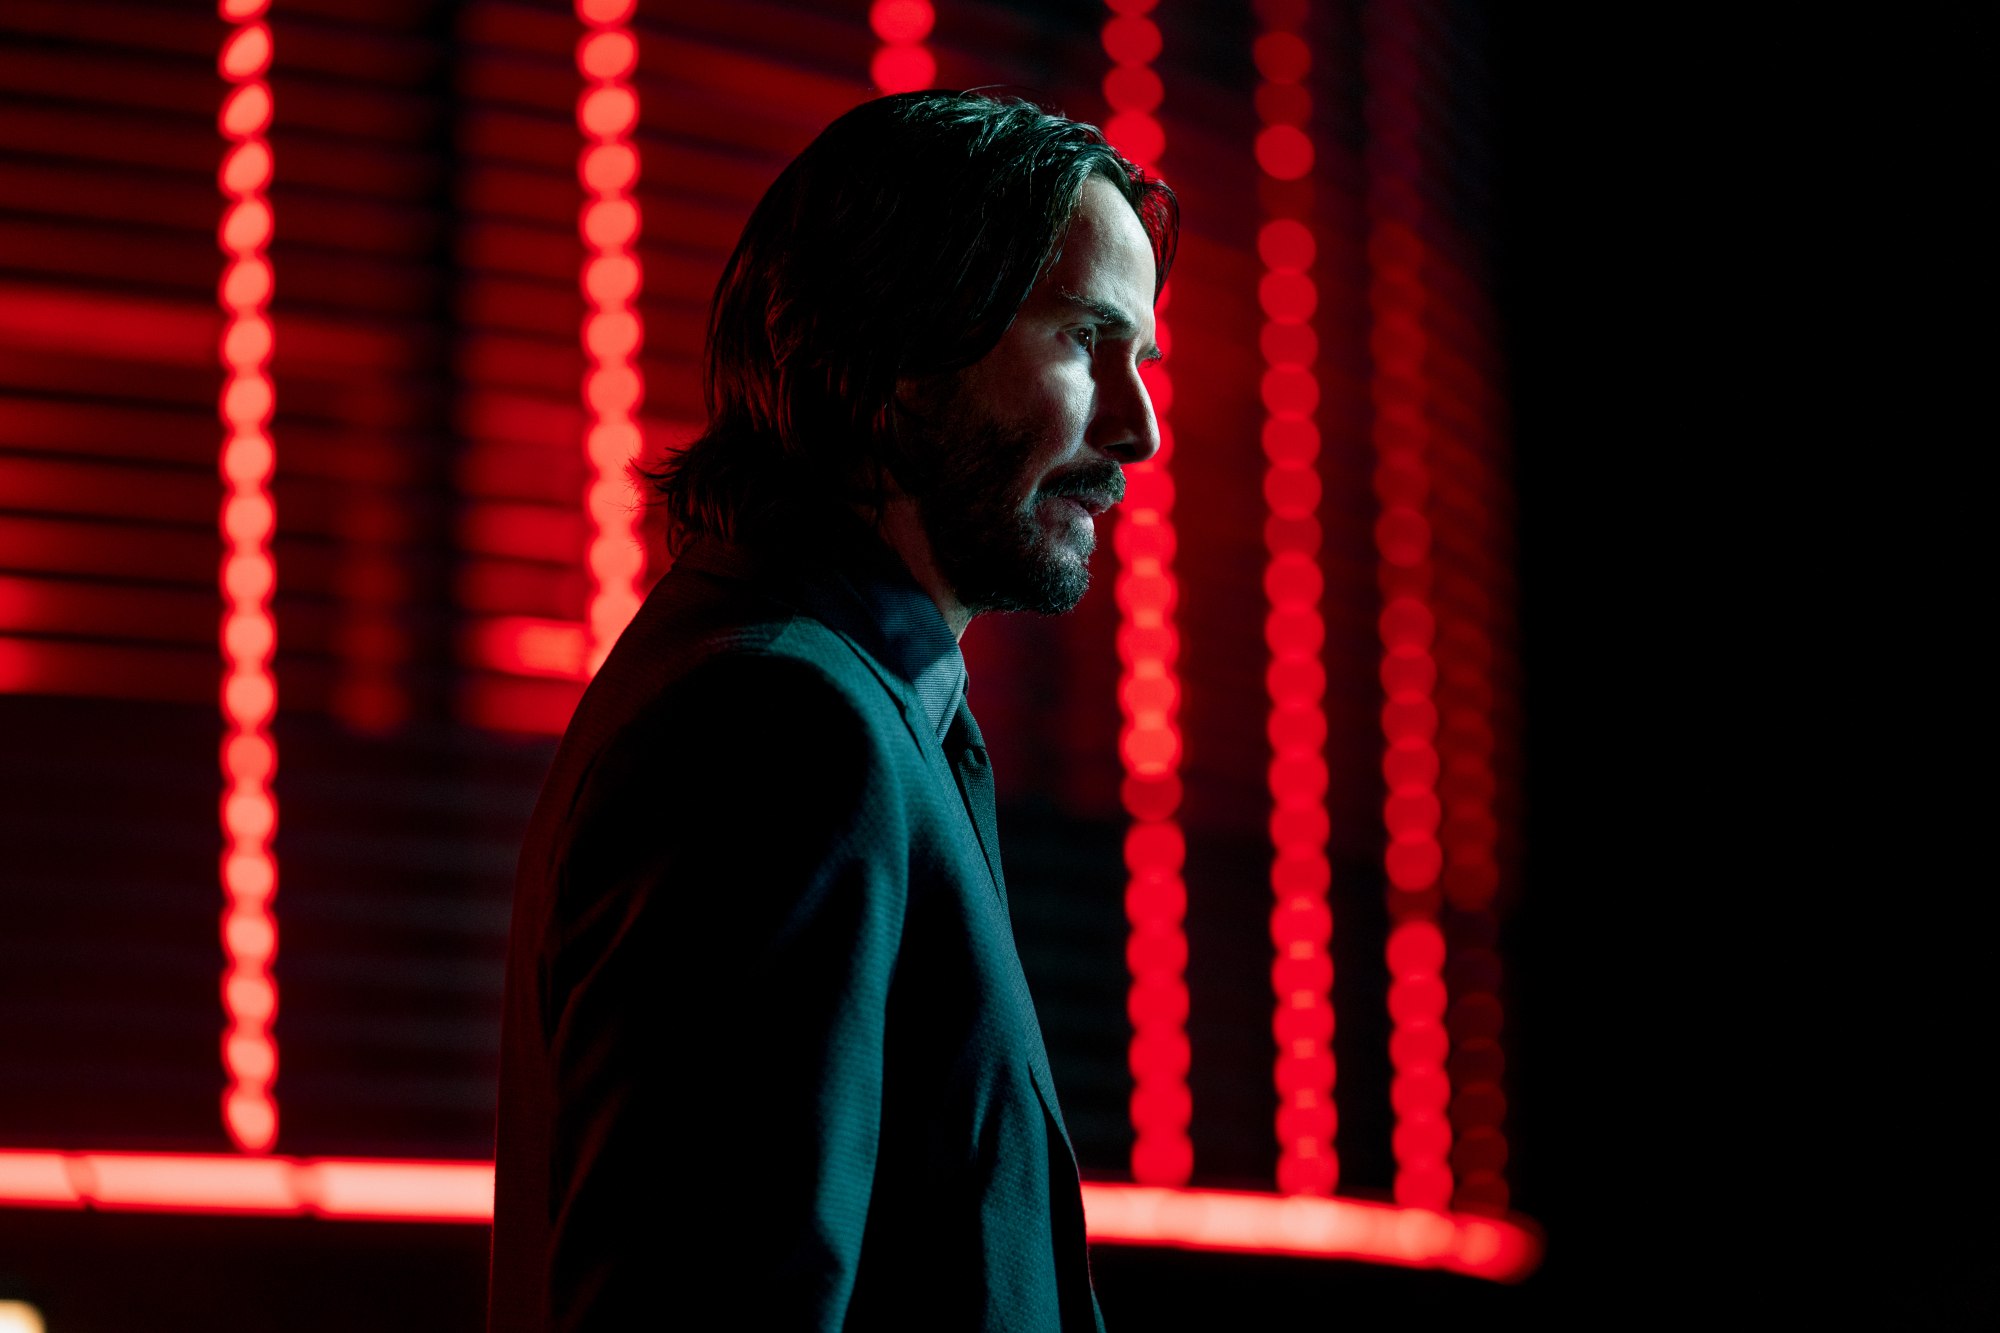 'John Wick: Chapter 4' Keanu Reeves as John Wick standing in front of neon red lighting.